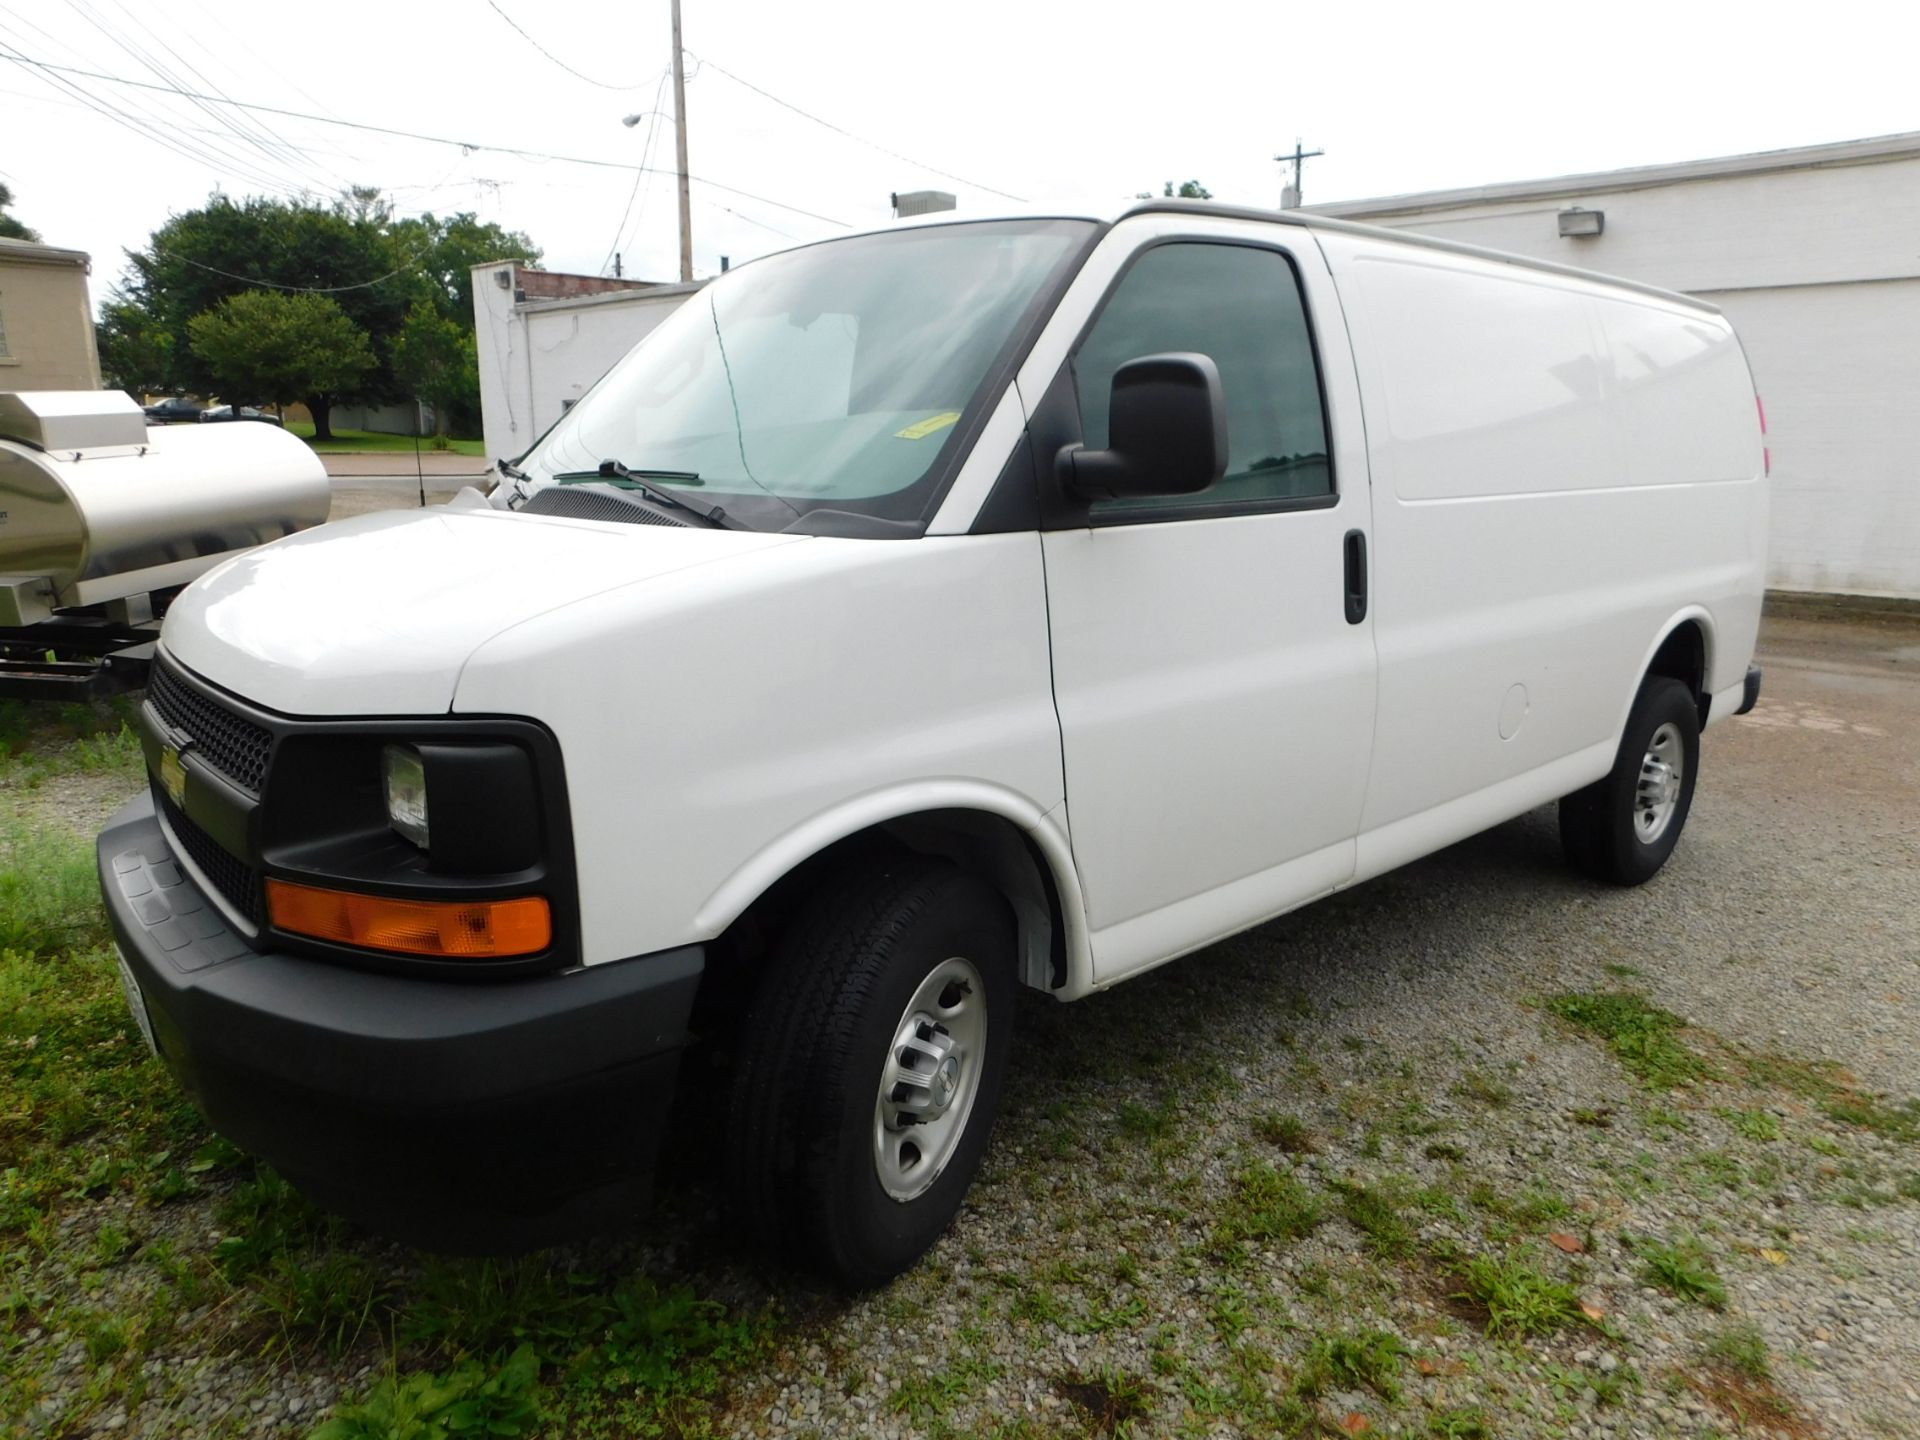 2017 Chevy 2500 Express Cargo Van, 18,100 Miles, L20 4.8L Engine, Gas Hitch, VIN 1GCWGAFF8H1347332